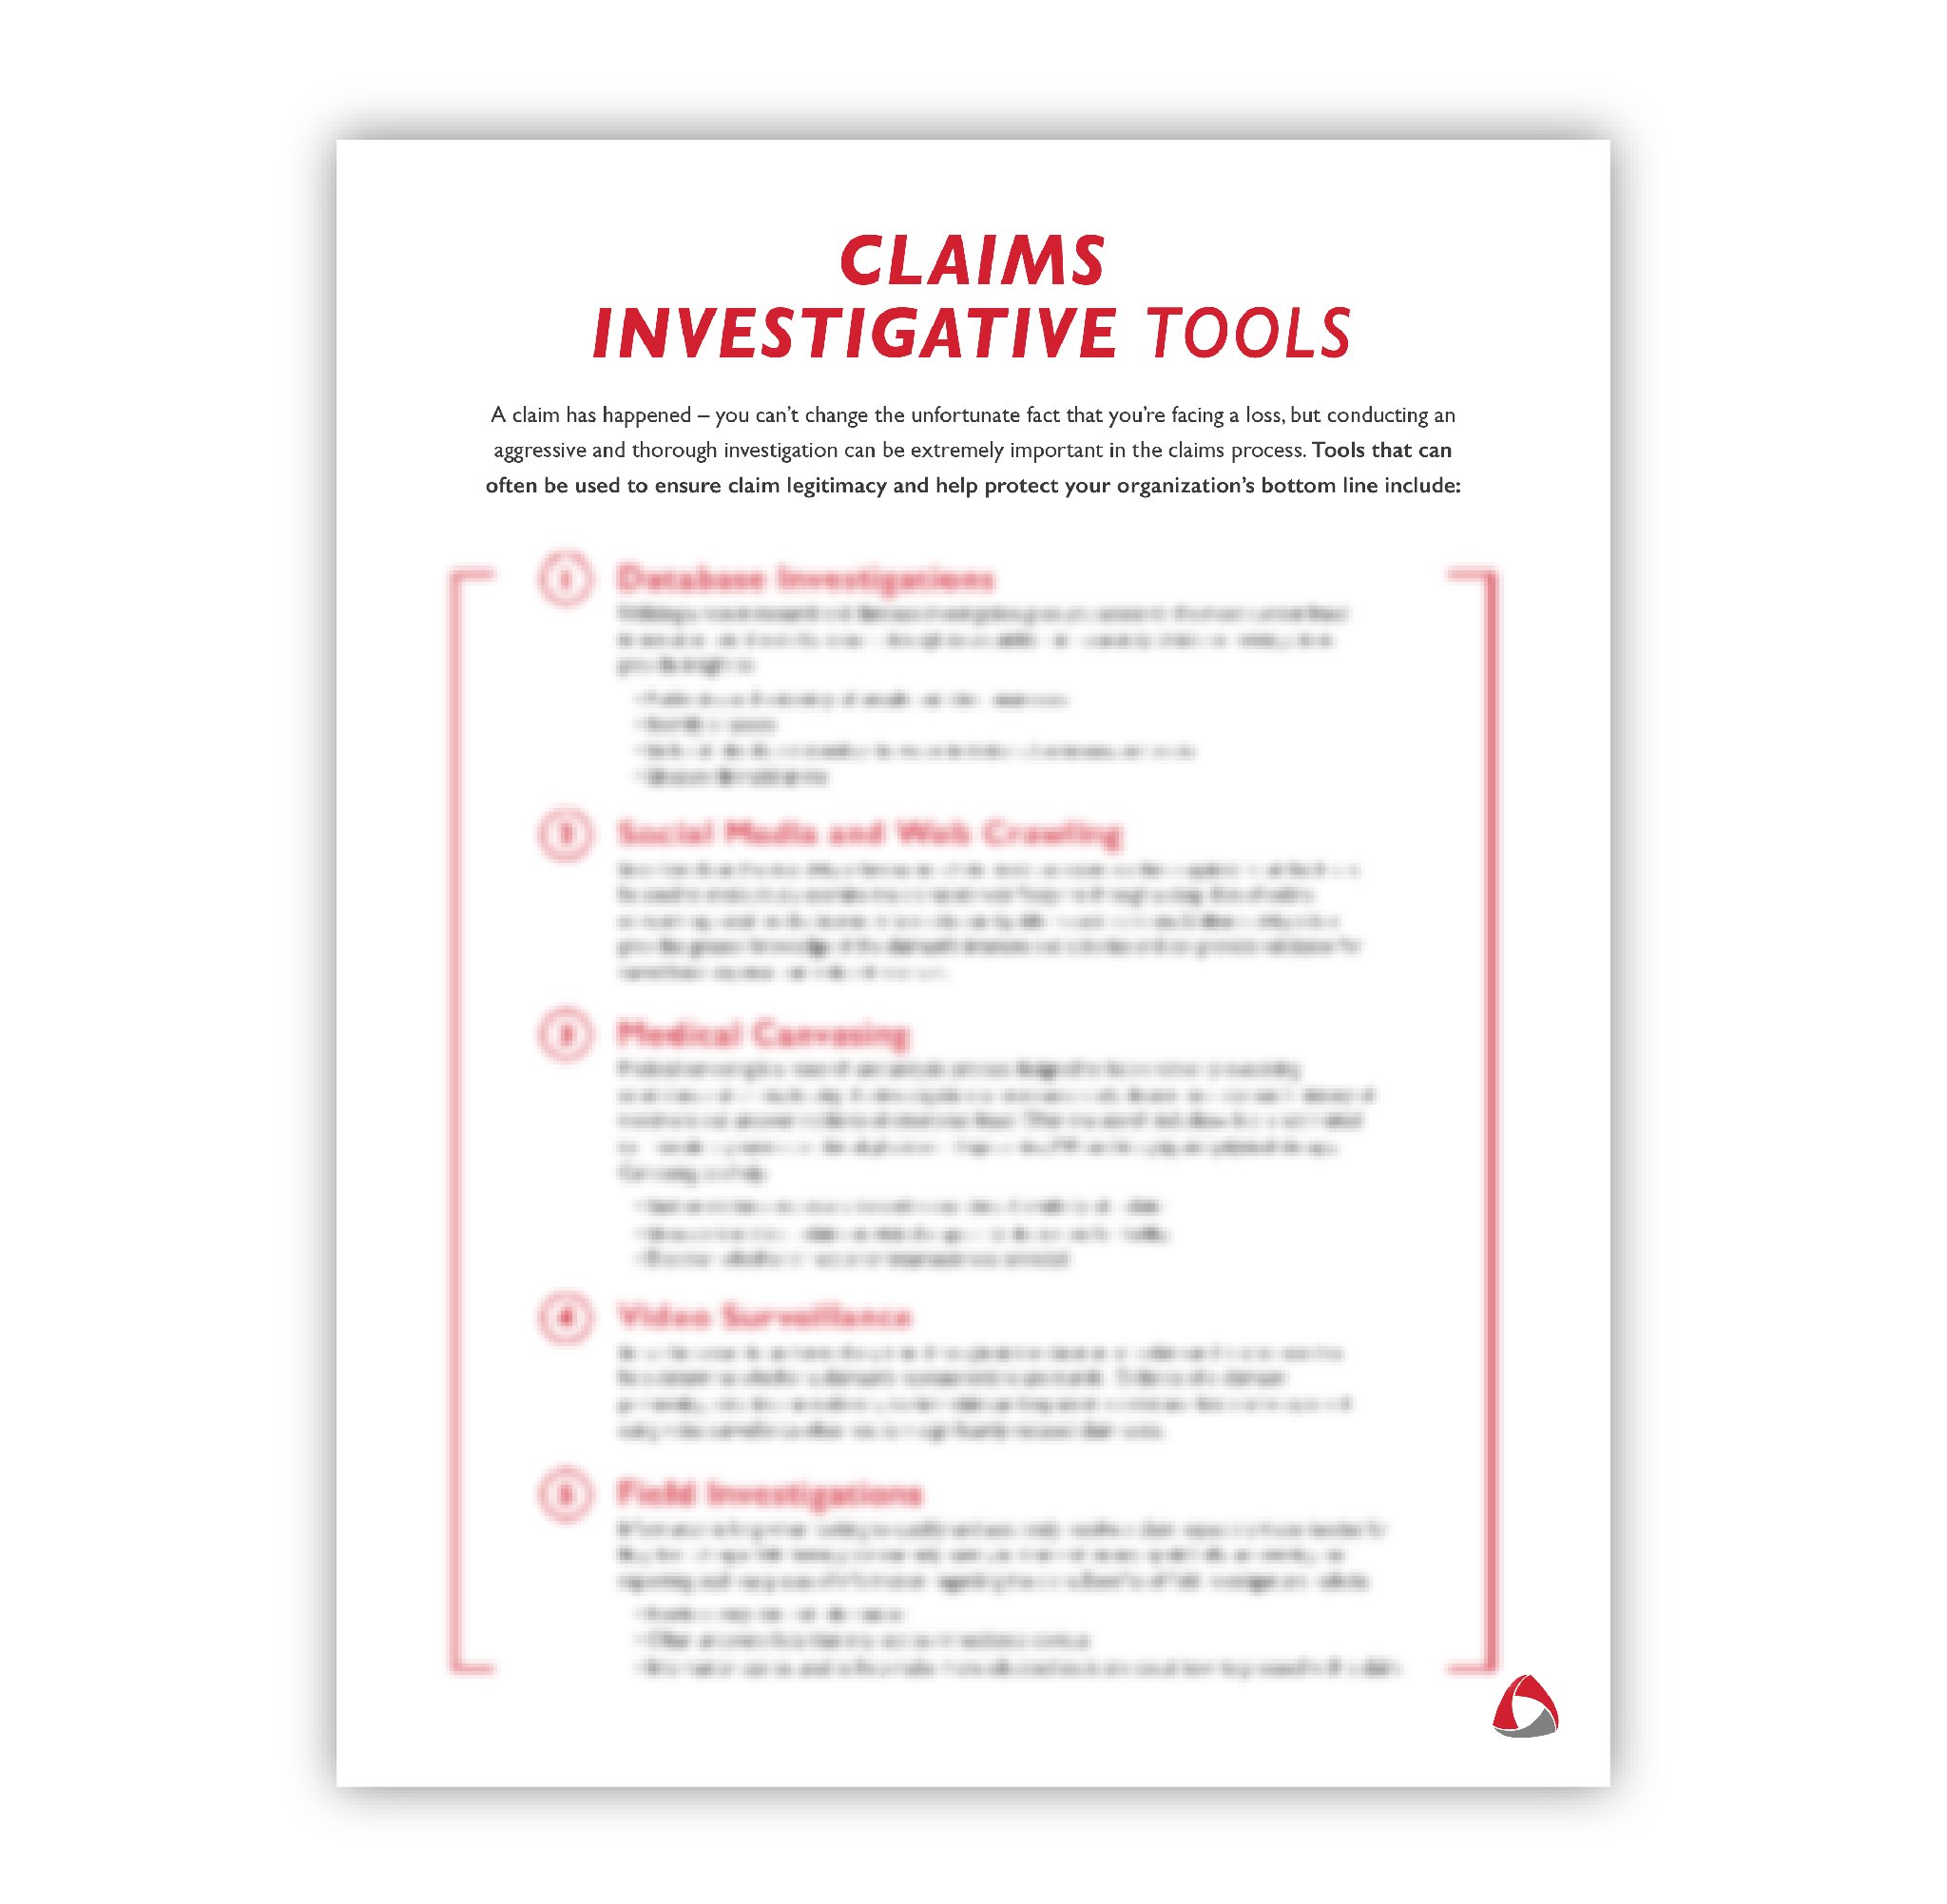 Claims Investiagative Tools-17-18 2-1